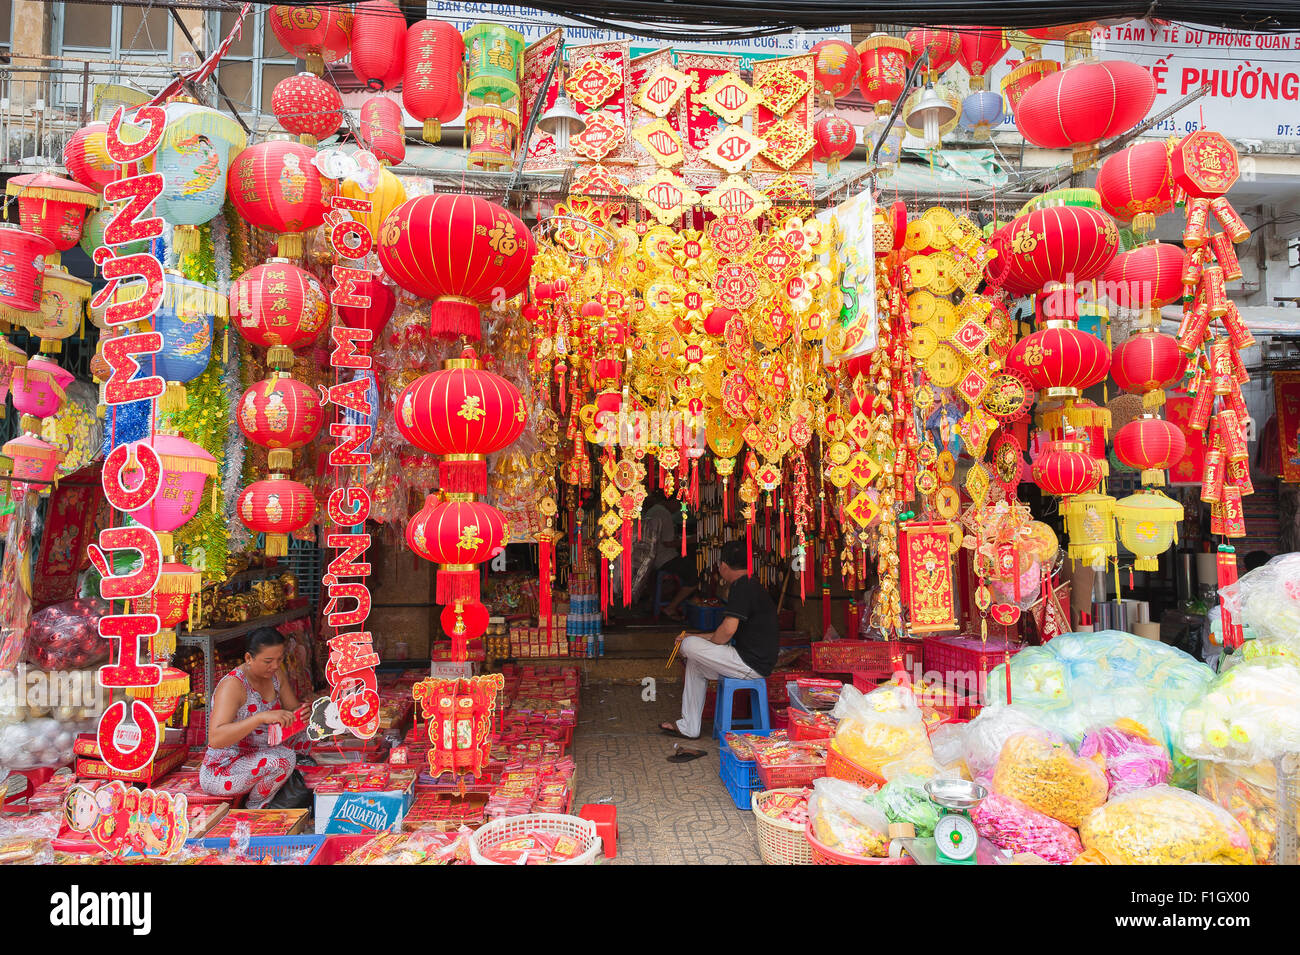 Chinese lanterns, a display of festive Chinese lanterns outside a shop in  the Cholon area of Ho Chi Minh City, Saigon, Vietnam Stock Photo - Alamy